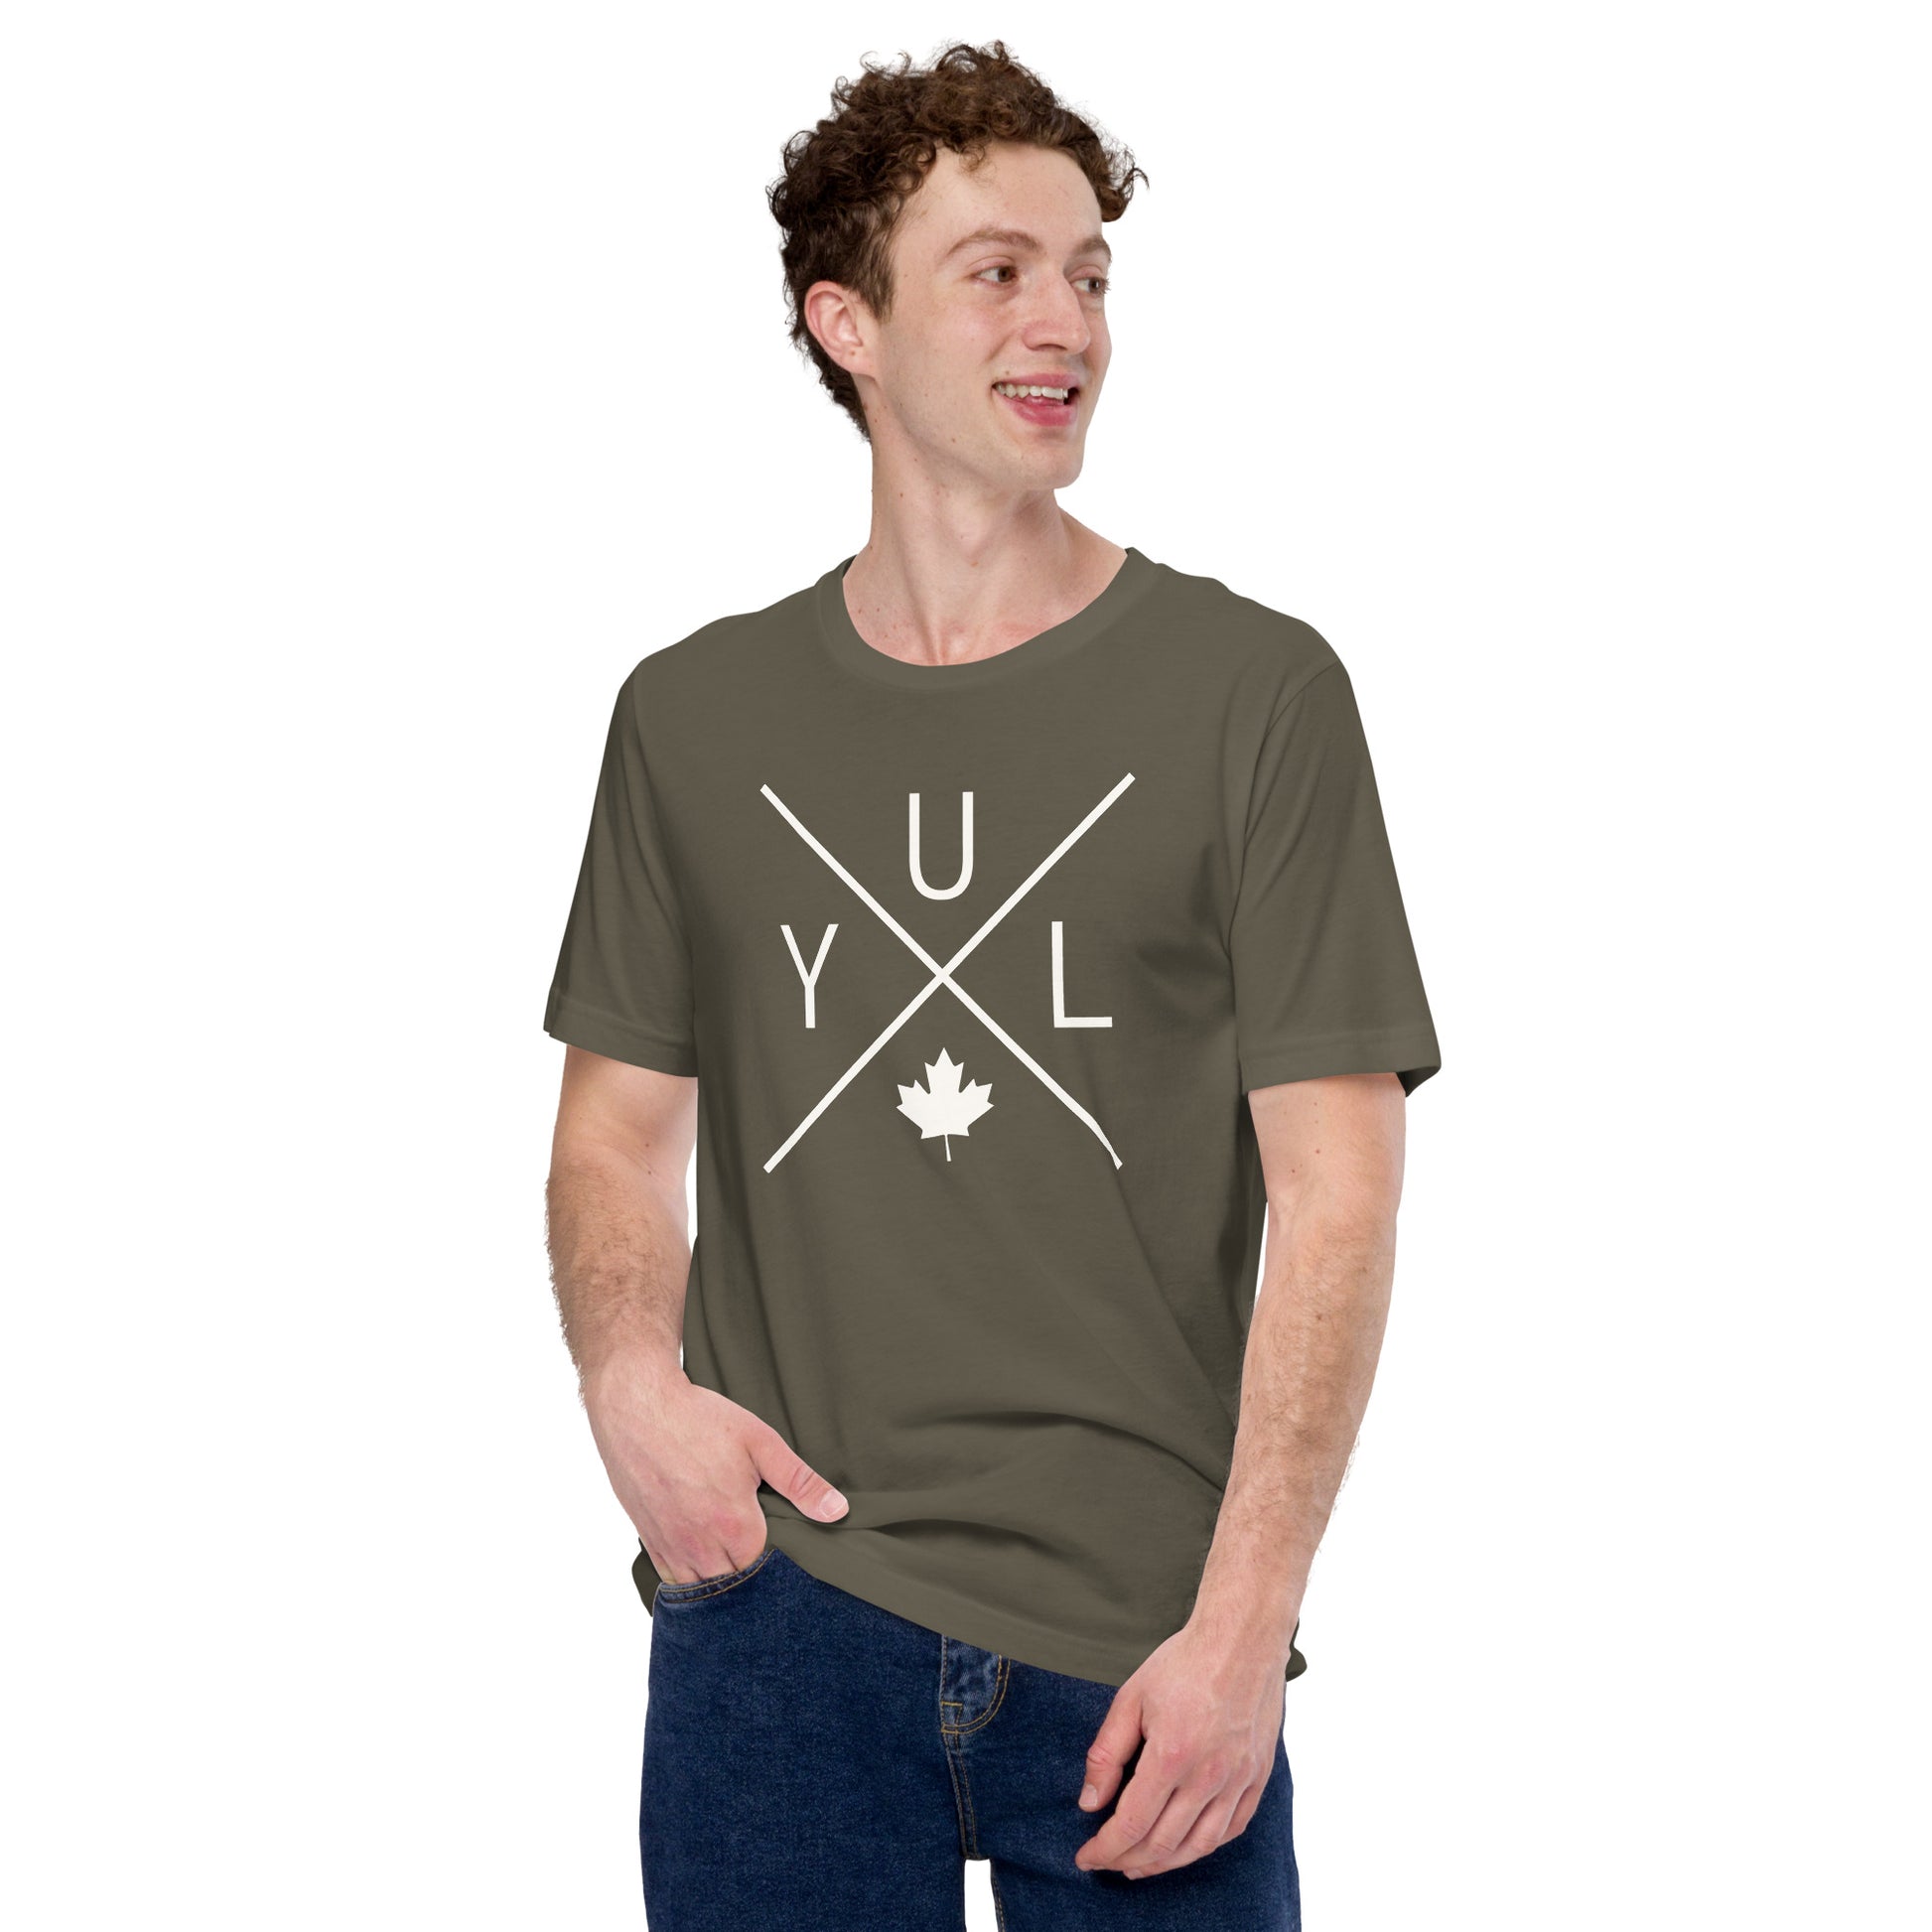 Crossed-X T-Shirt - White Graphic • YUL Montreal • YHM Designs - Image 09